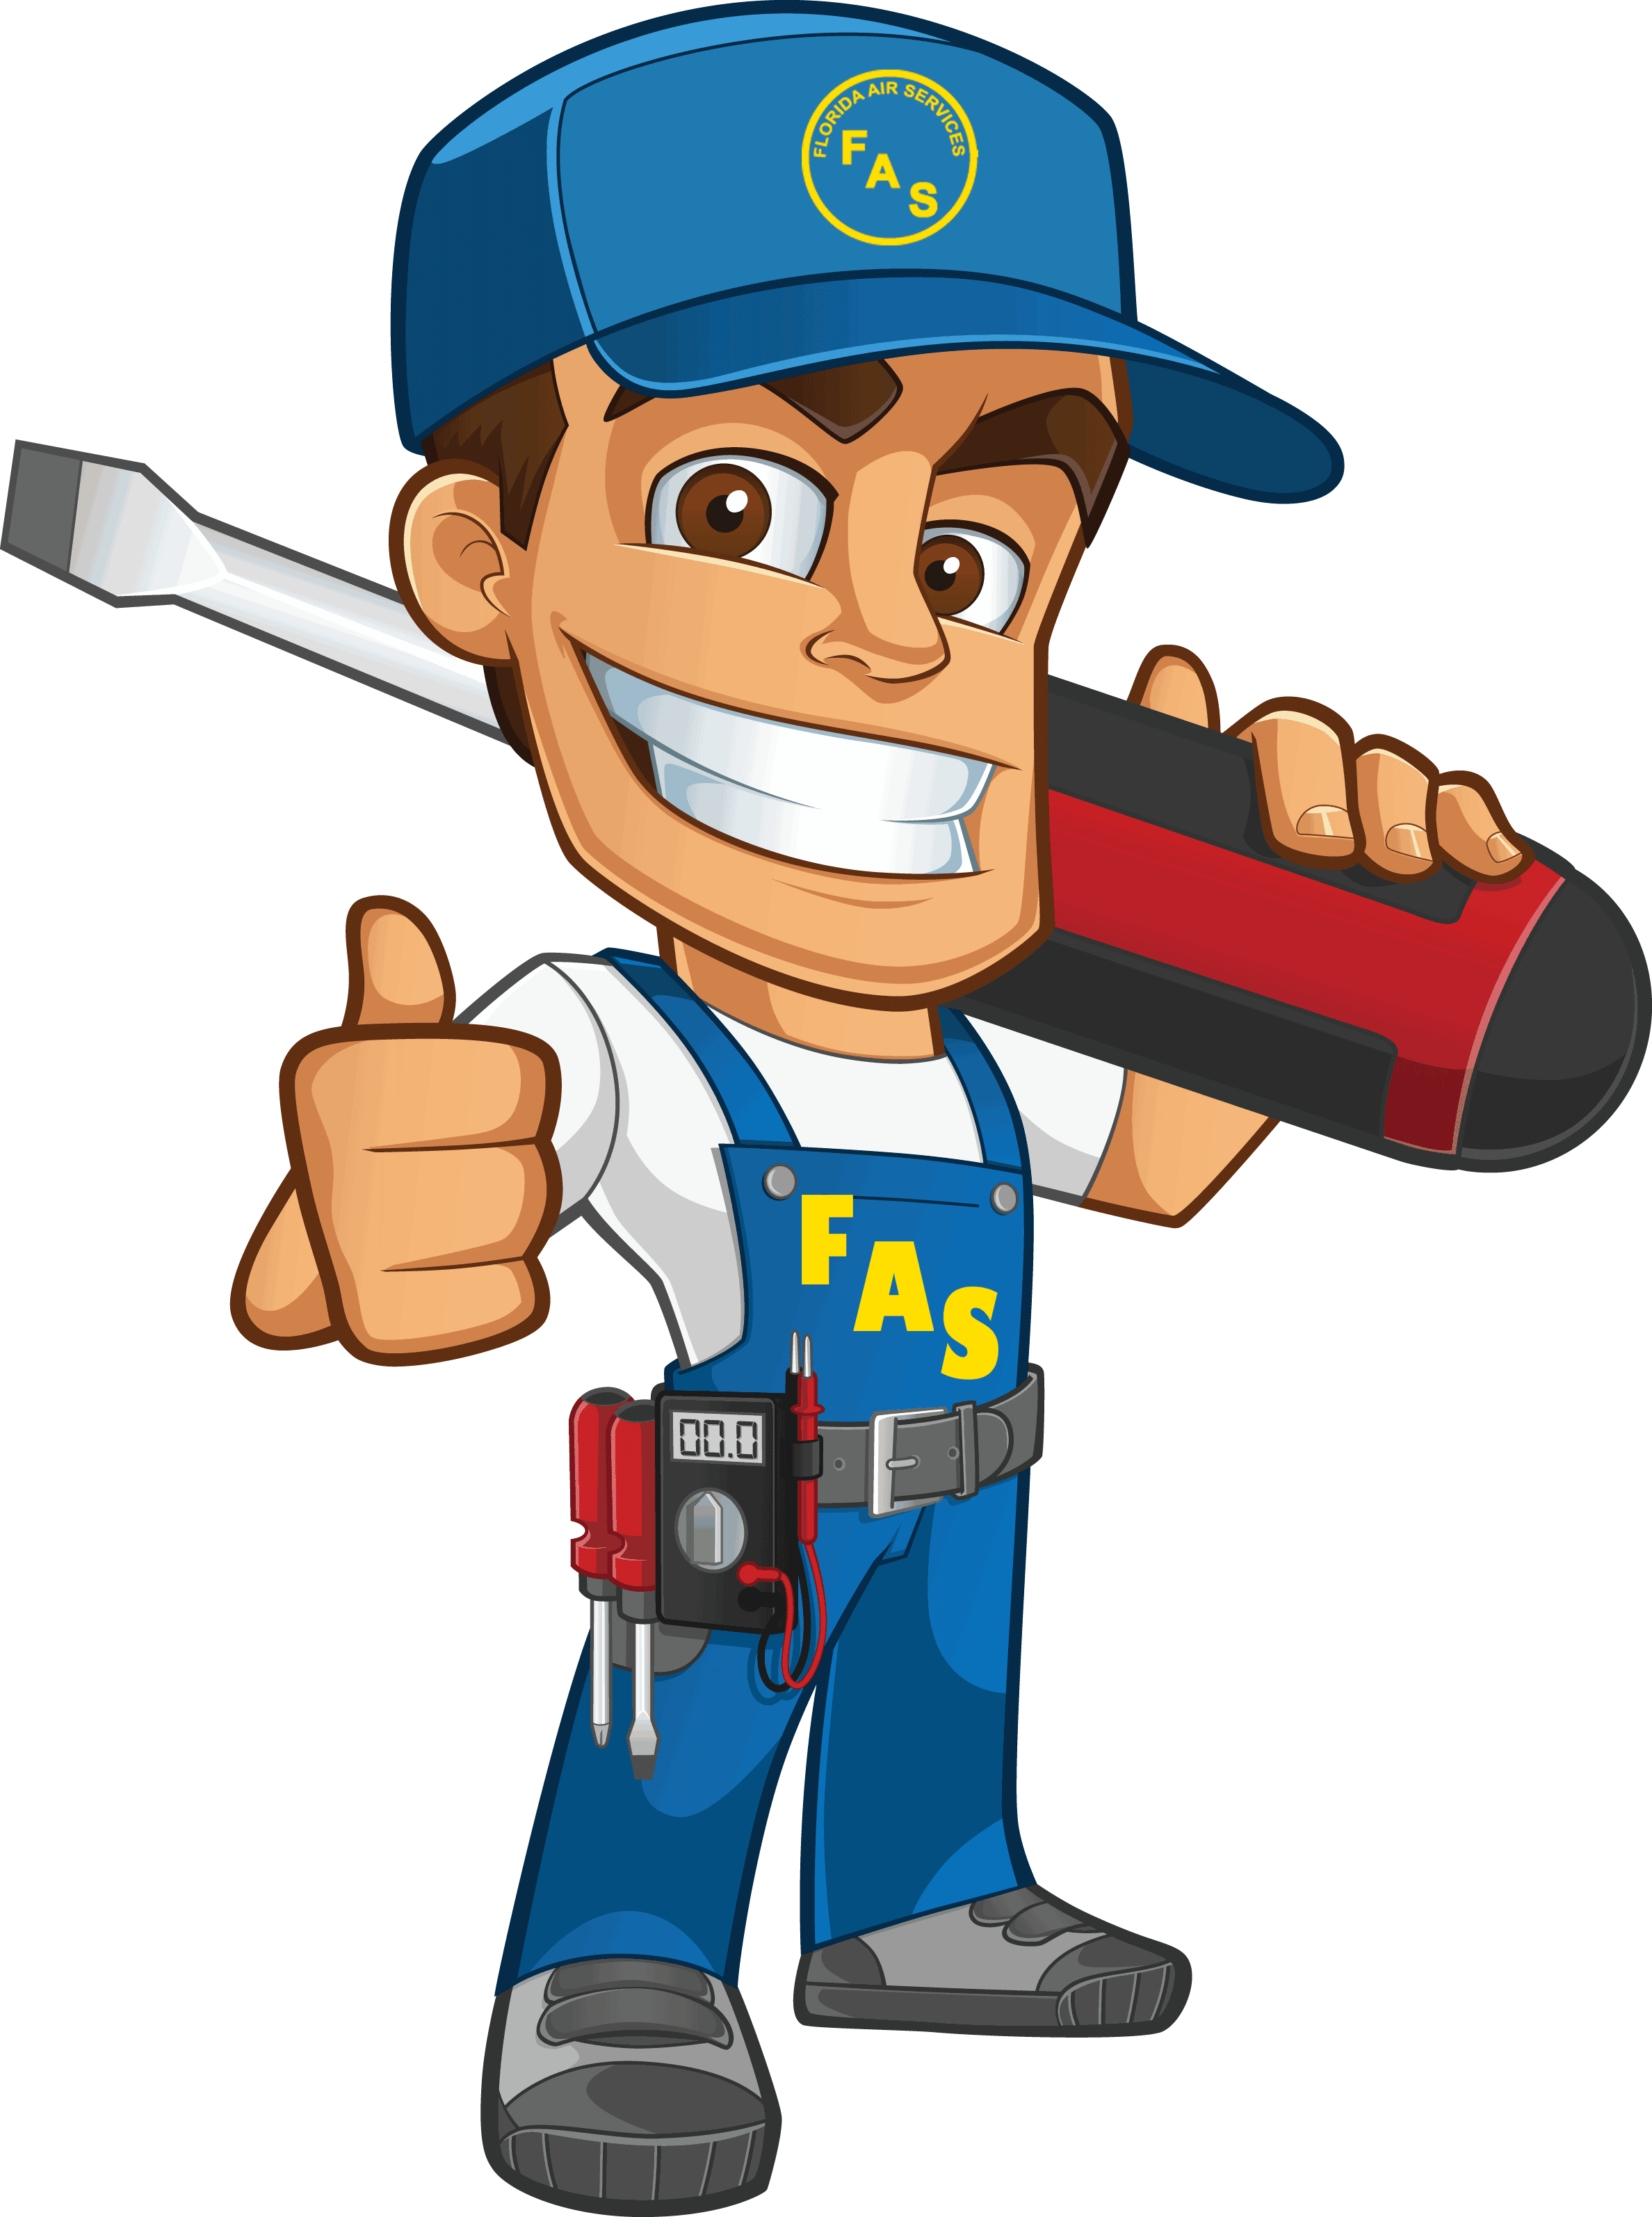 A cartoon of a man holding a wrench and giving the thumbs up.